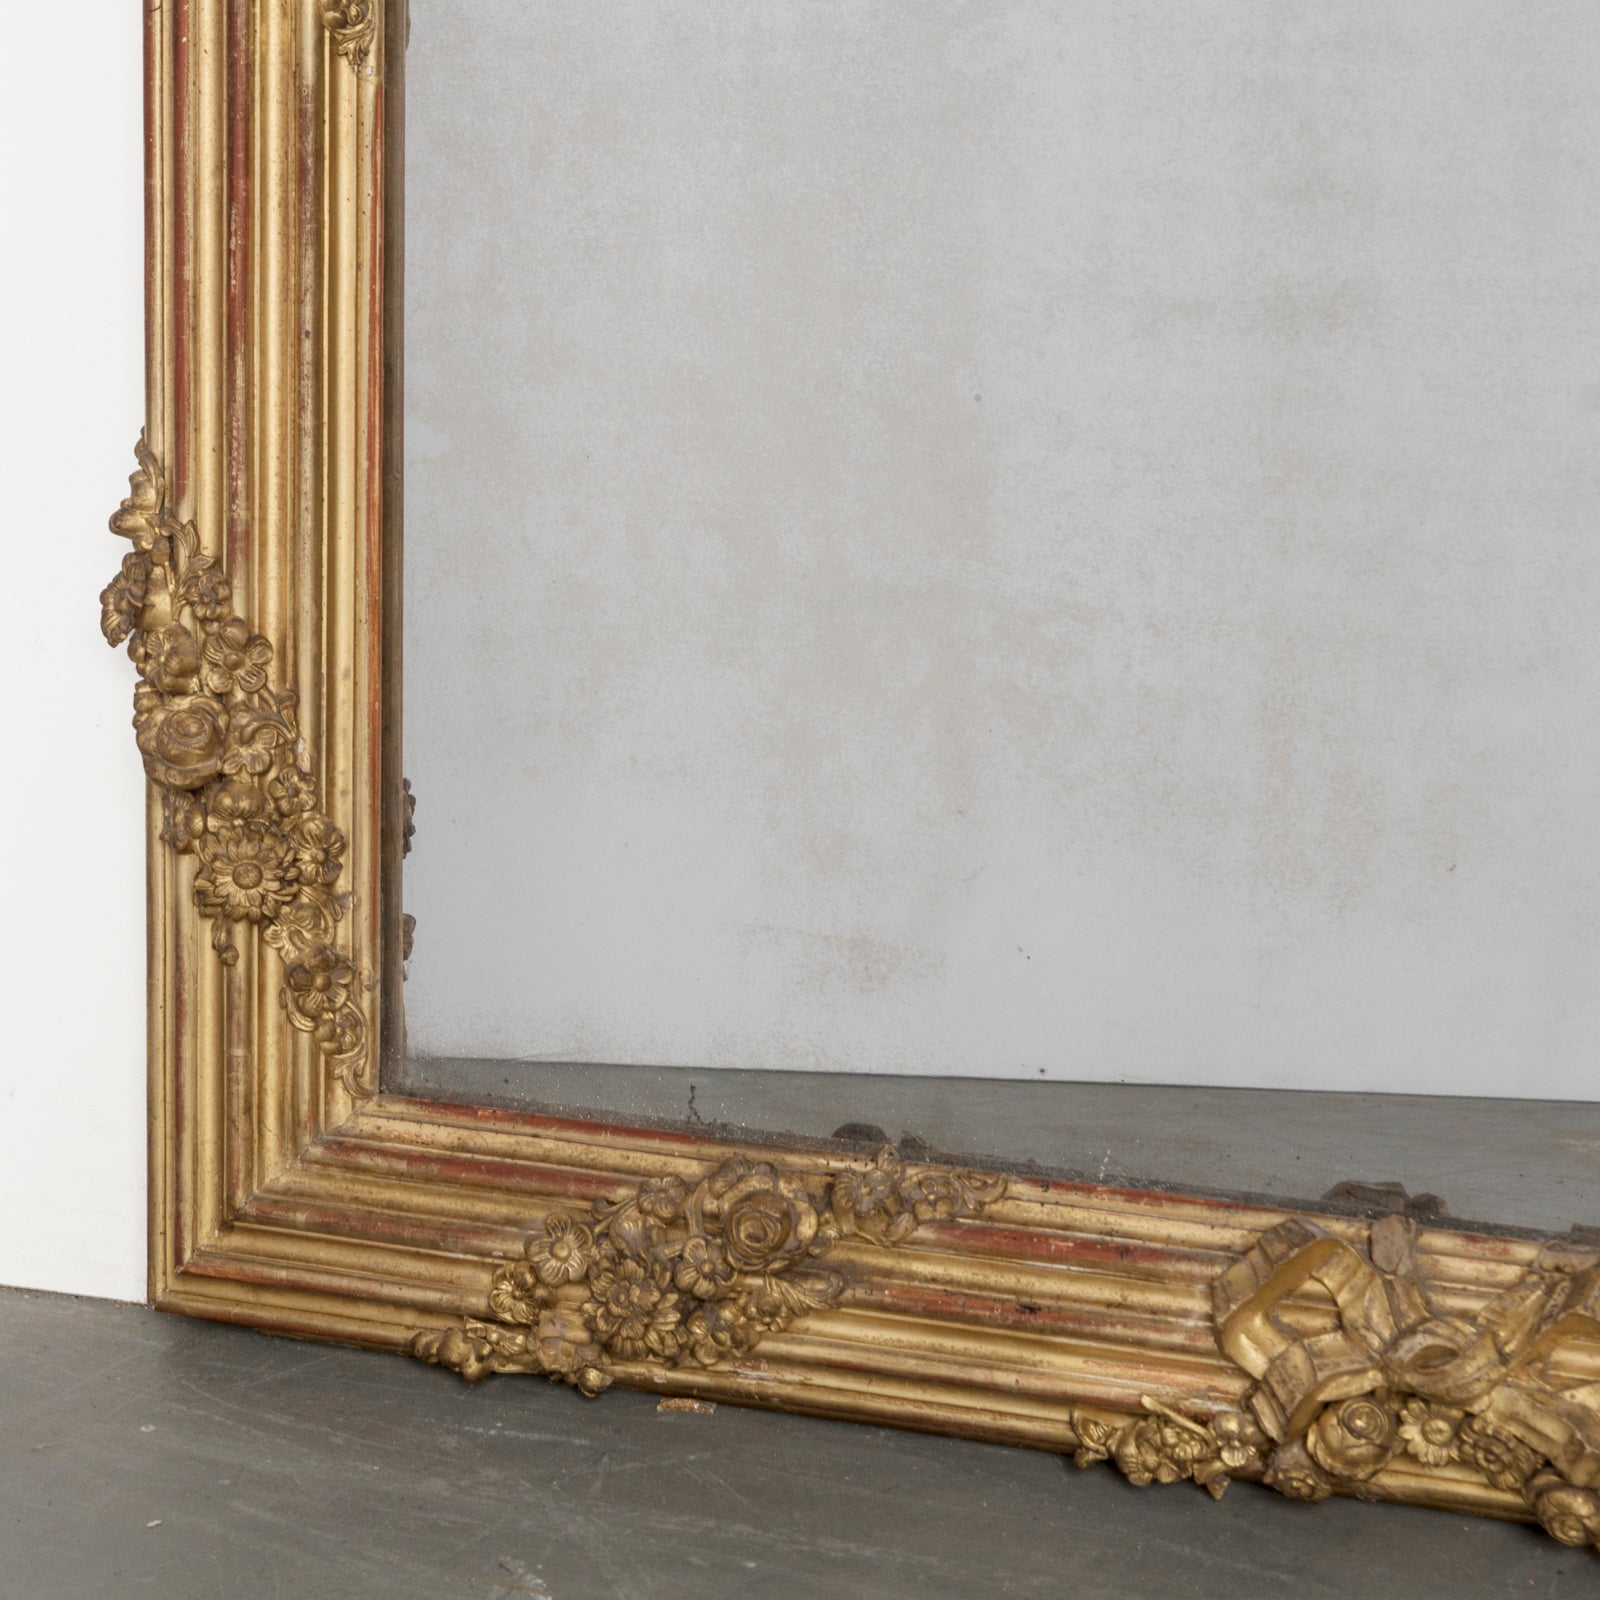 Large French Antique Mirror with Shell Crest